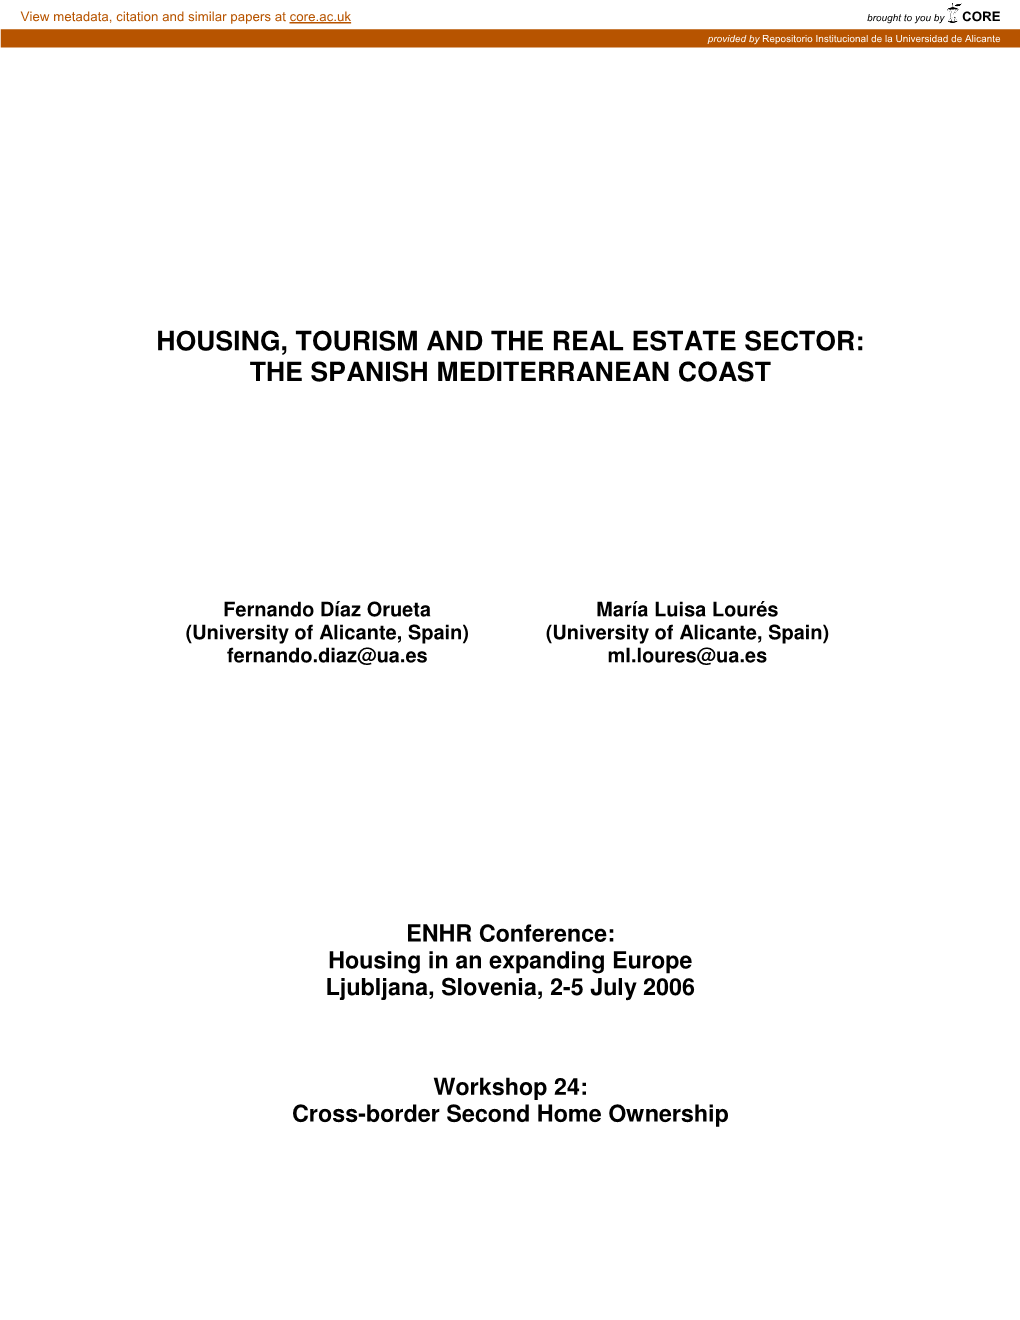 Housing, Tourism and the Real Estate Sector: the Spanish Mediterranean Coast